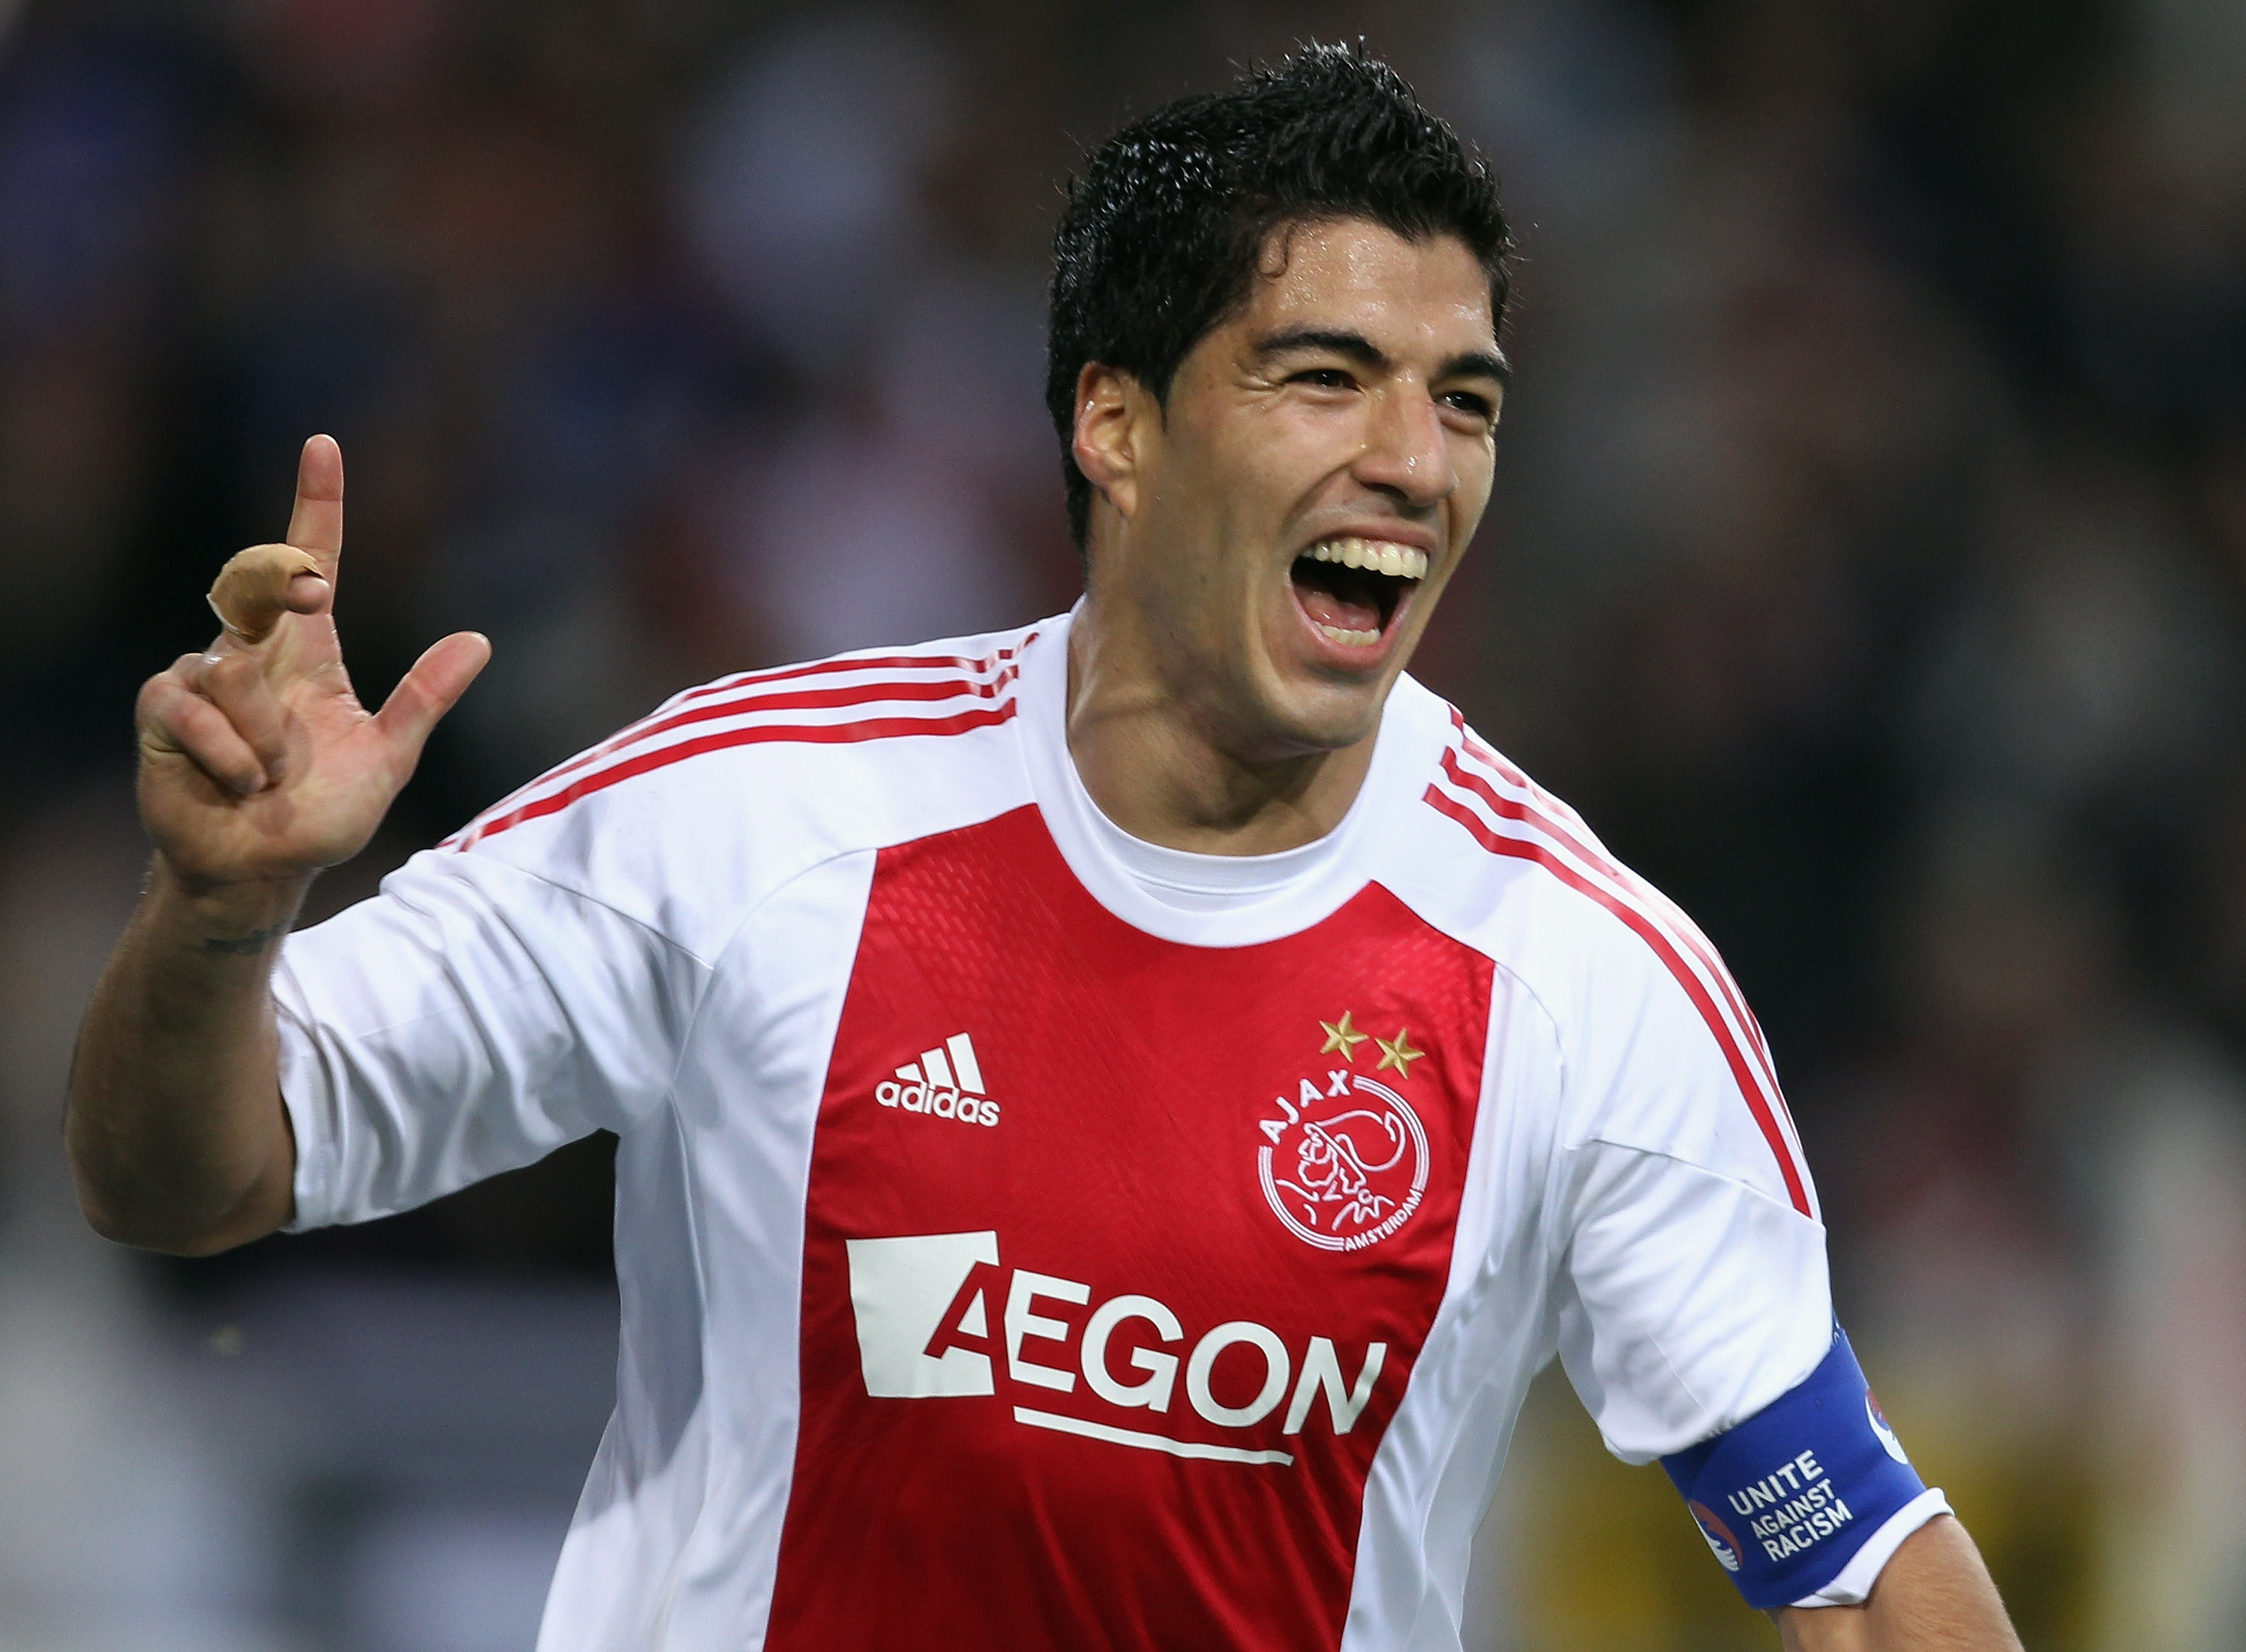 AMSTERDAM, NETHERLANDS - OCTOBER 19:  Luis Suarez of AFC Ajax celebrates scoring during the UEFA Champions League Group G match between AFC Ajax and AJ Auxerre at the Amsterdam ArenA on October 19, 2010 in Amsterdam, Netherlands.  (Photo by Bryn Lennon/Ge